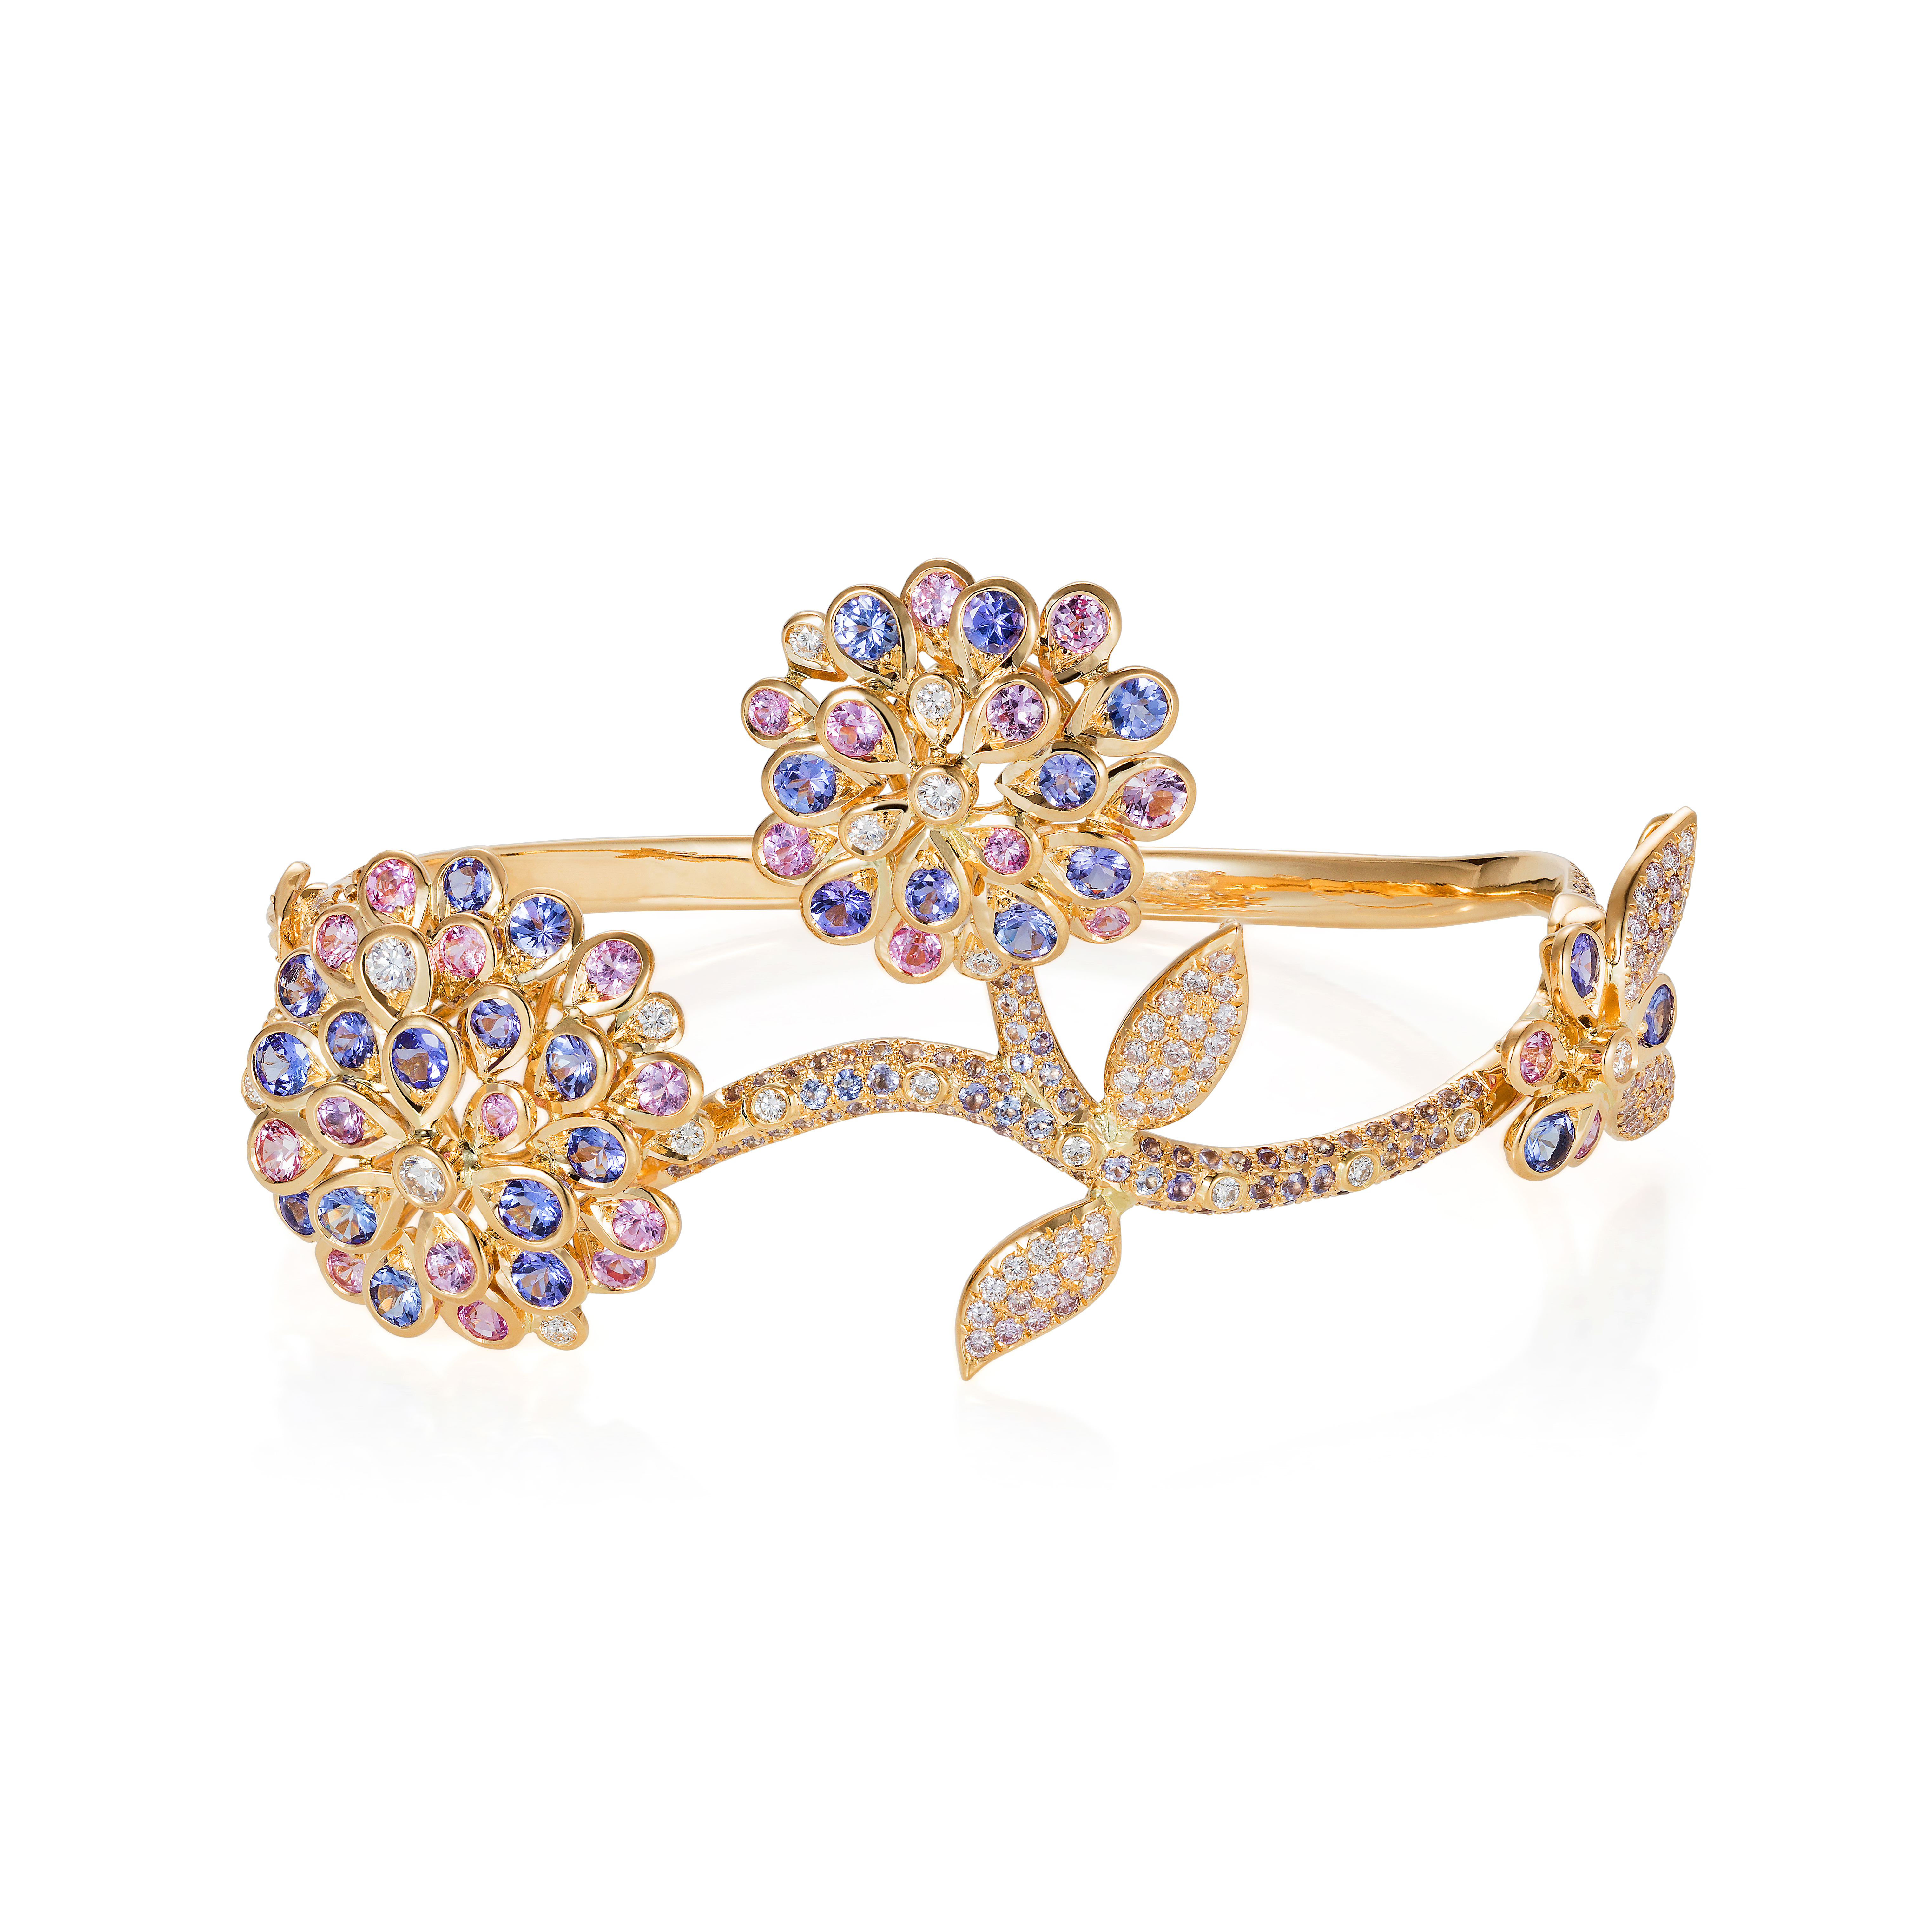 Shimmer Bangle – Tanzanite, Pink Sapphire, Pink And White Diamonds In 18k Gold